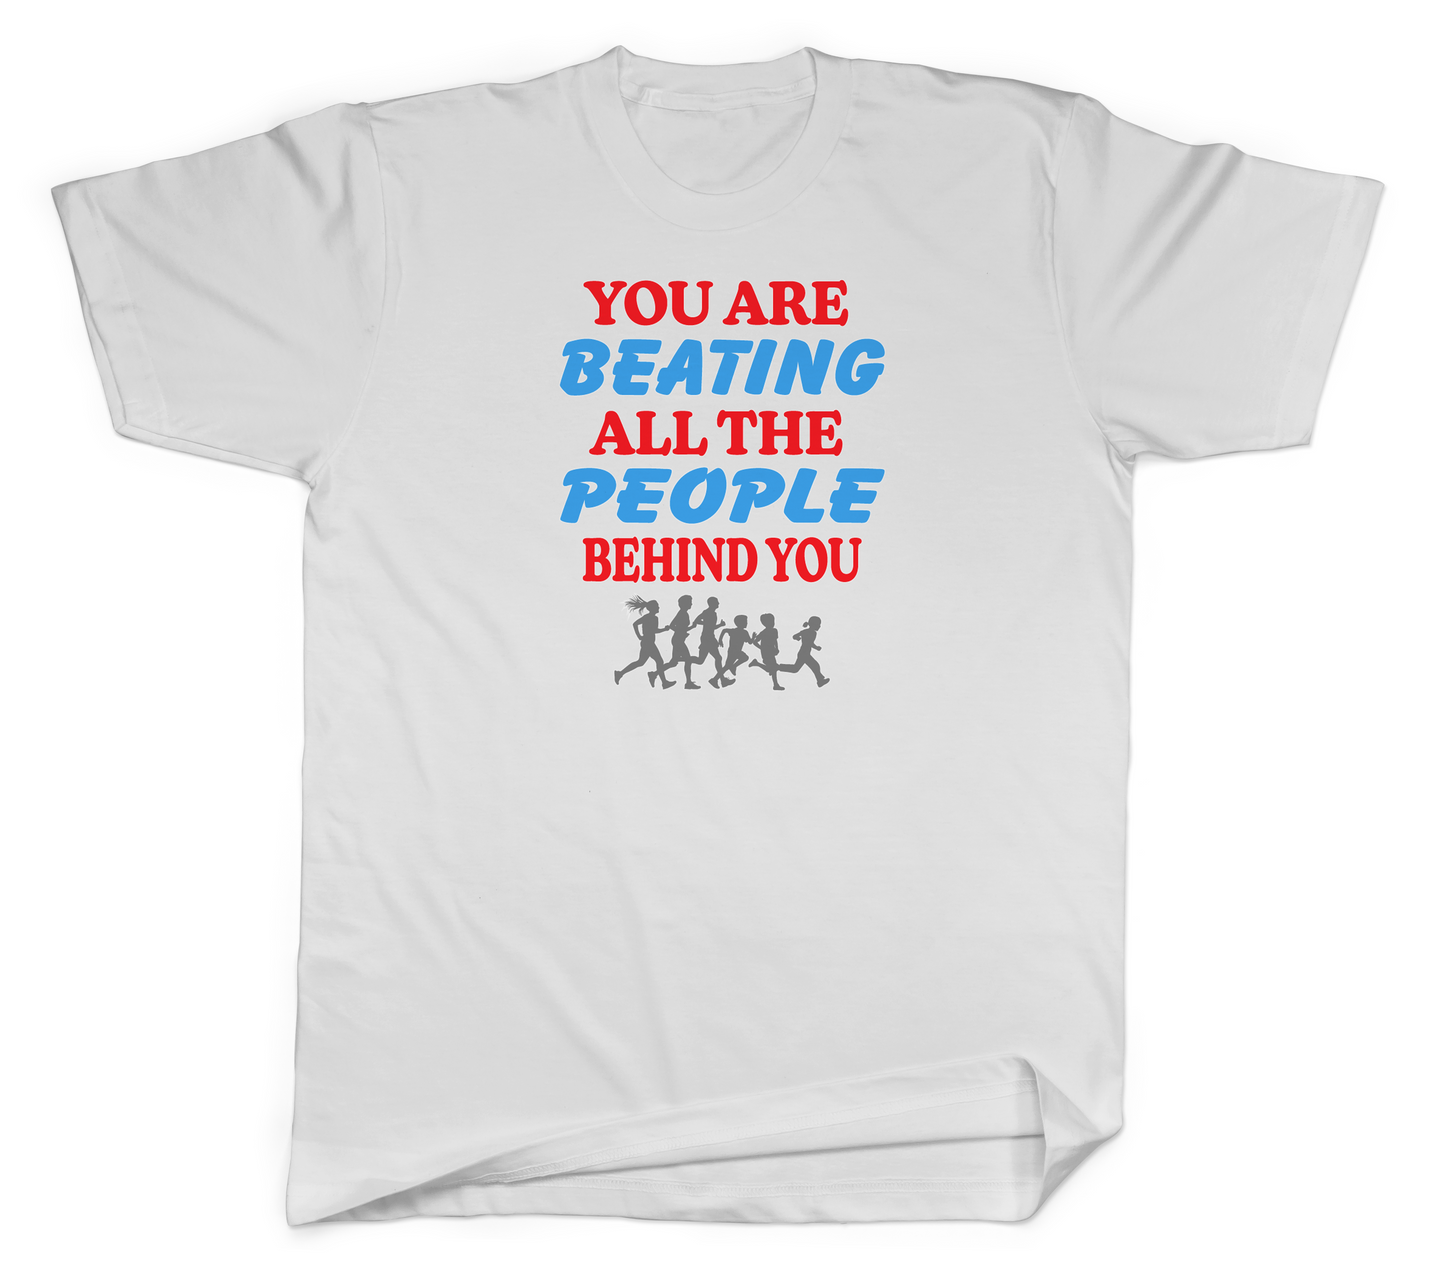 You Are Beating All the People Behind You Basic Tee